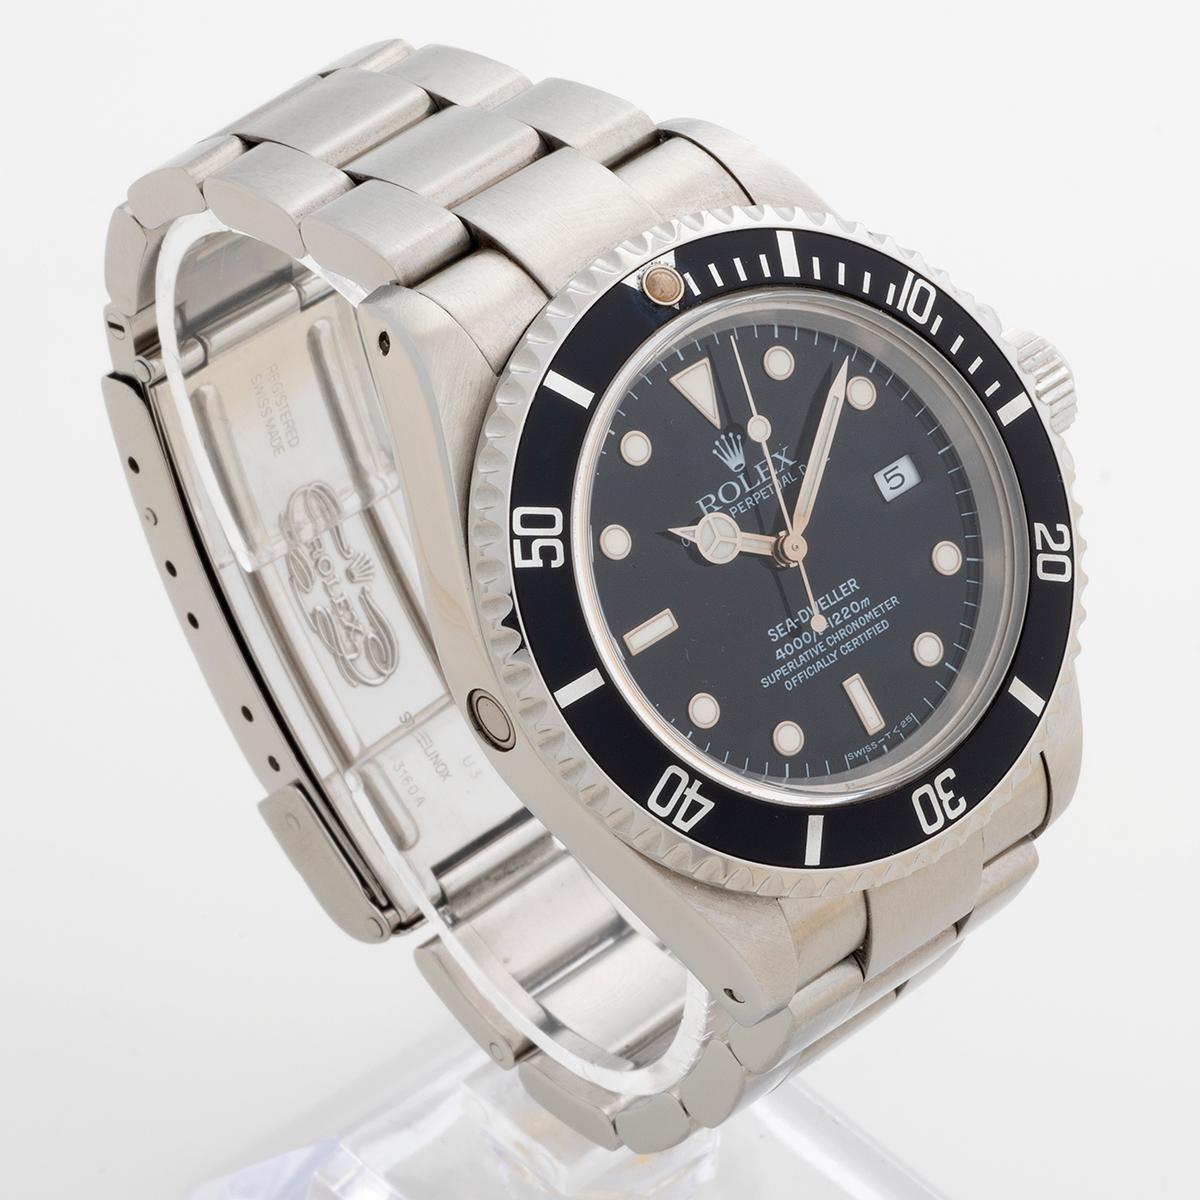 Our neo - vintage Rolex Sea-Dweller , reference 16600 , features its original tritium dial with matching hands, and greyish original bezel insert with patinated pearl giving a great vintage appearance for a classic Rolex sports watch. Presented in